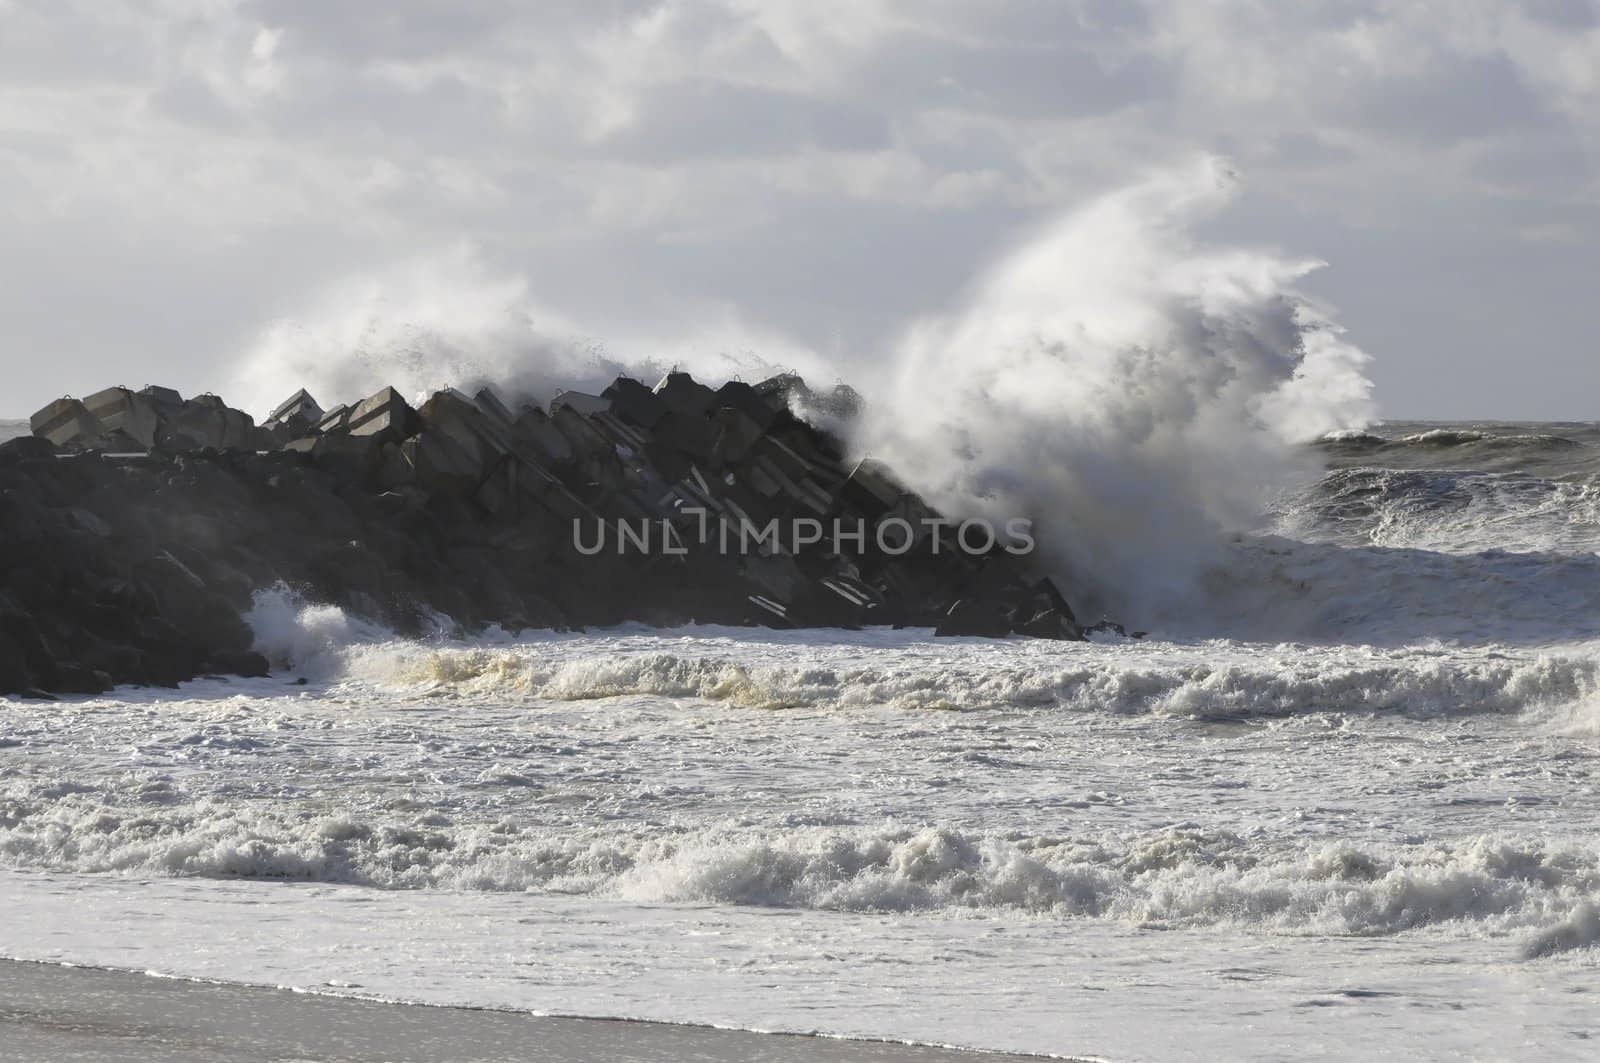 Very big wave on a concrete blocks jetty during a storm